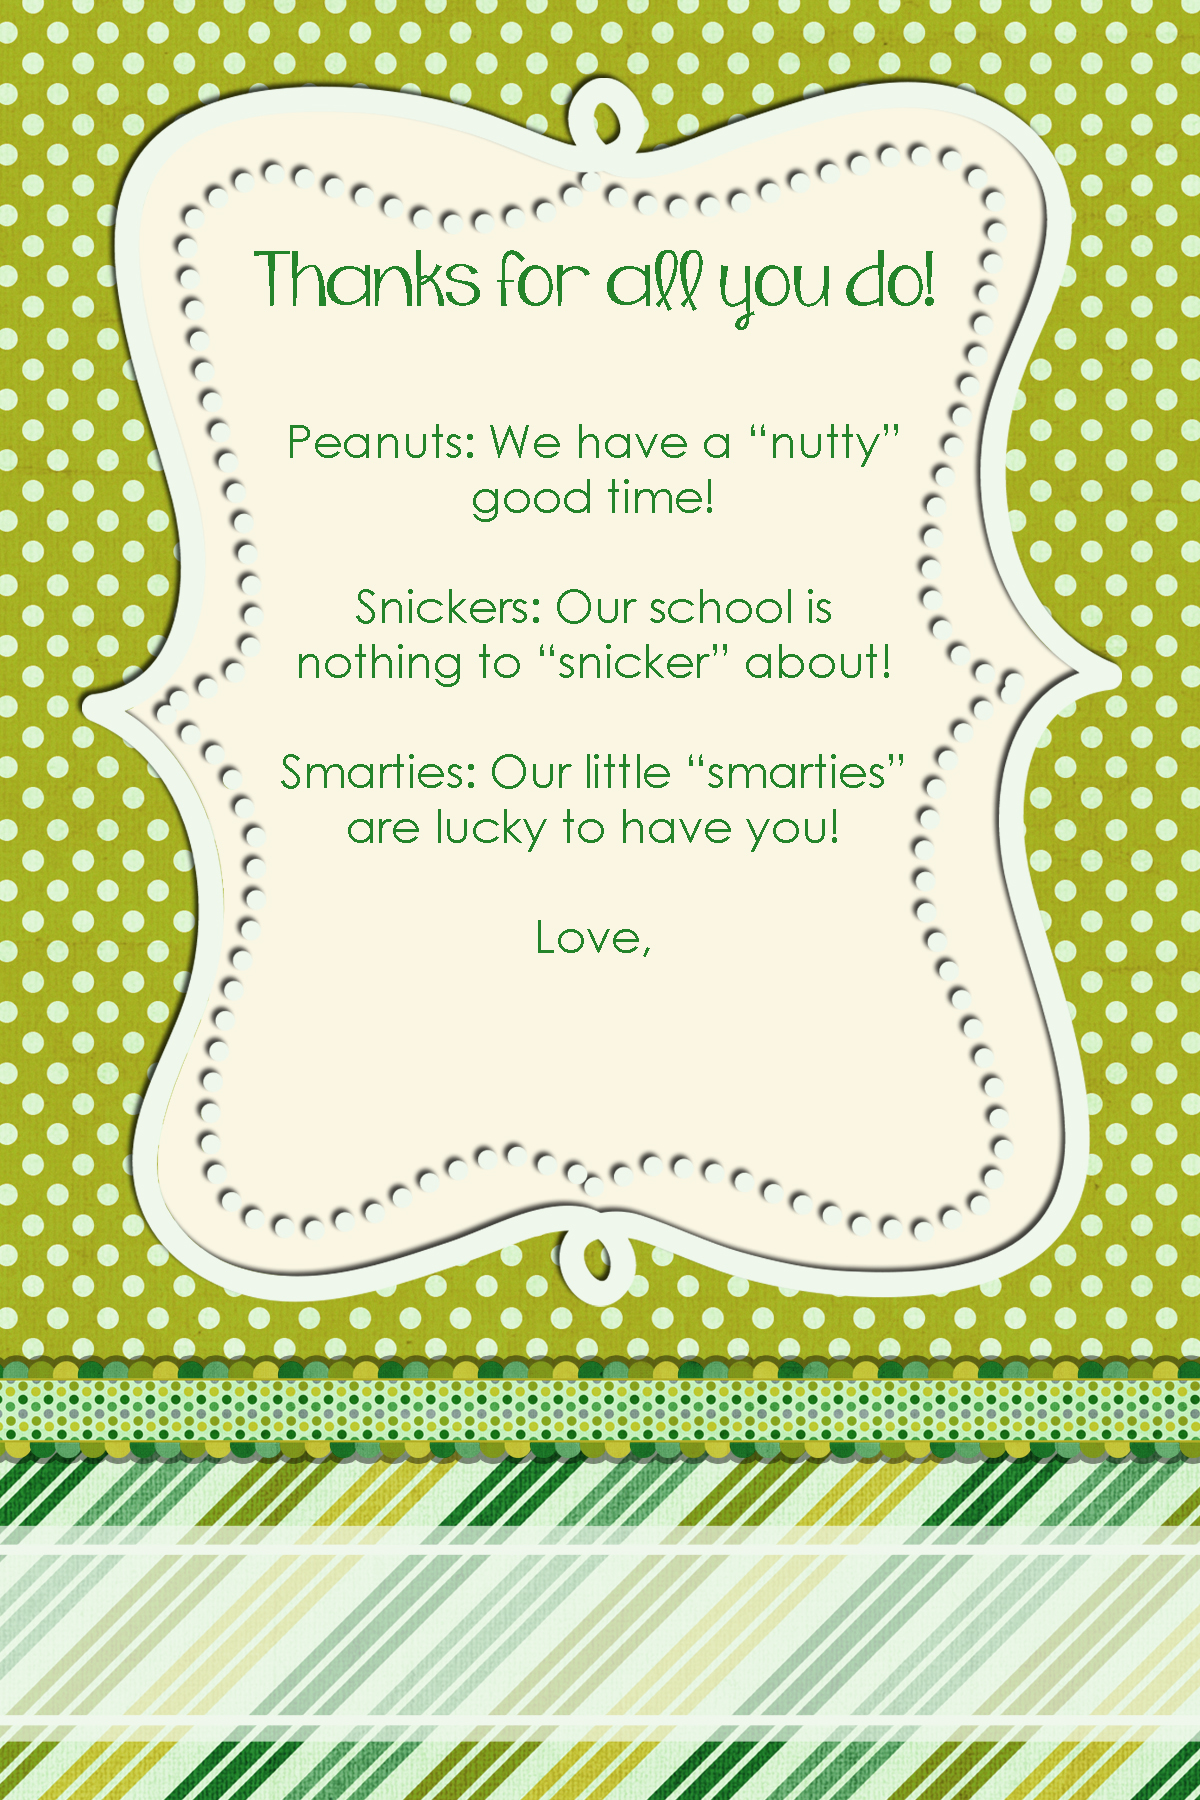 Candy Thank You Notes for Teachers & Staff | Squarehead Teachers